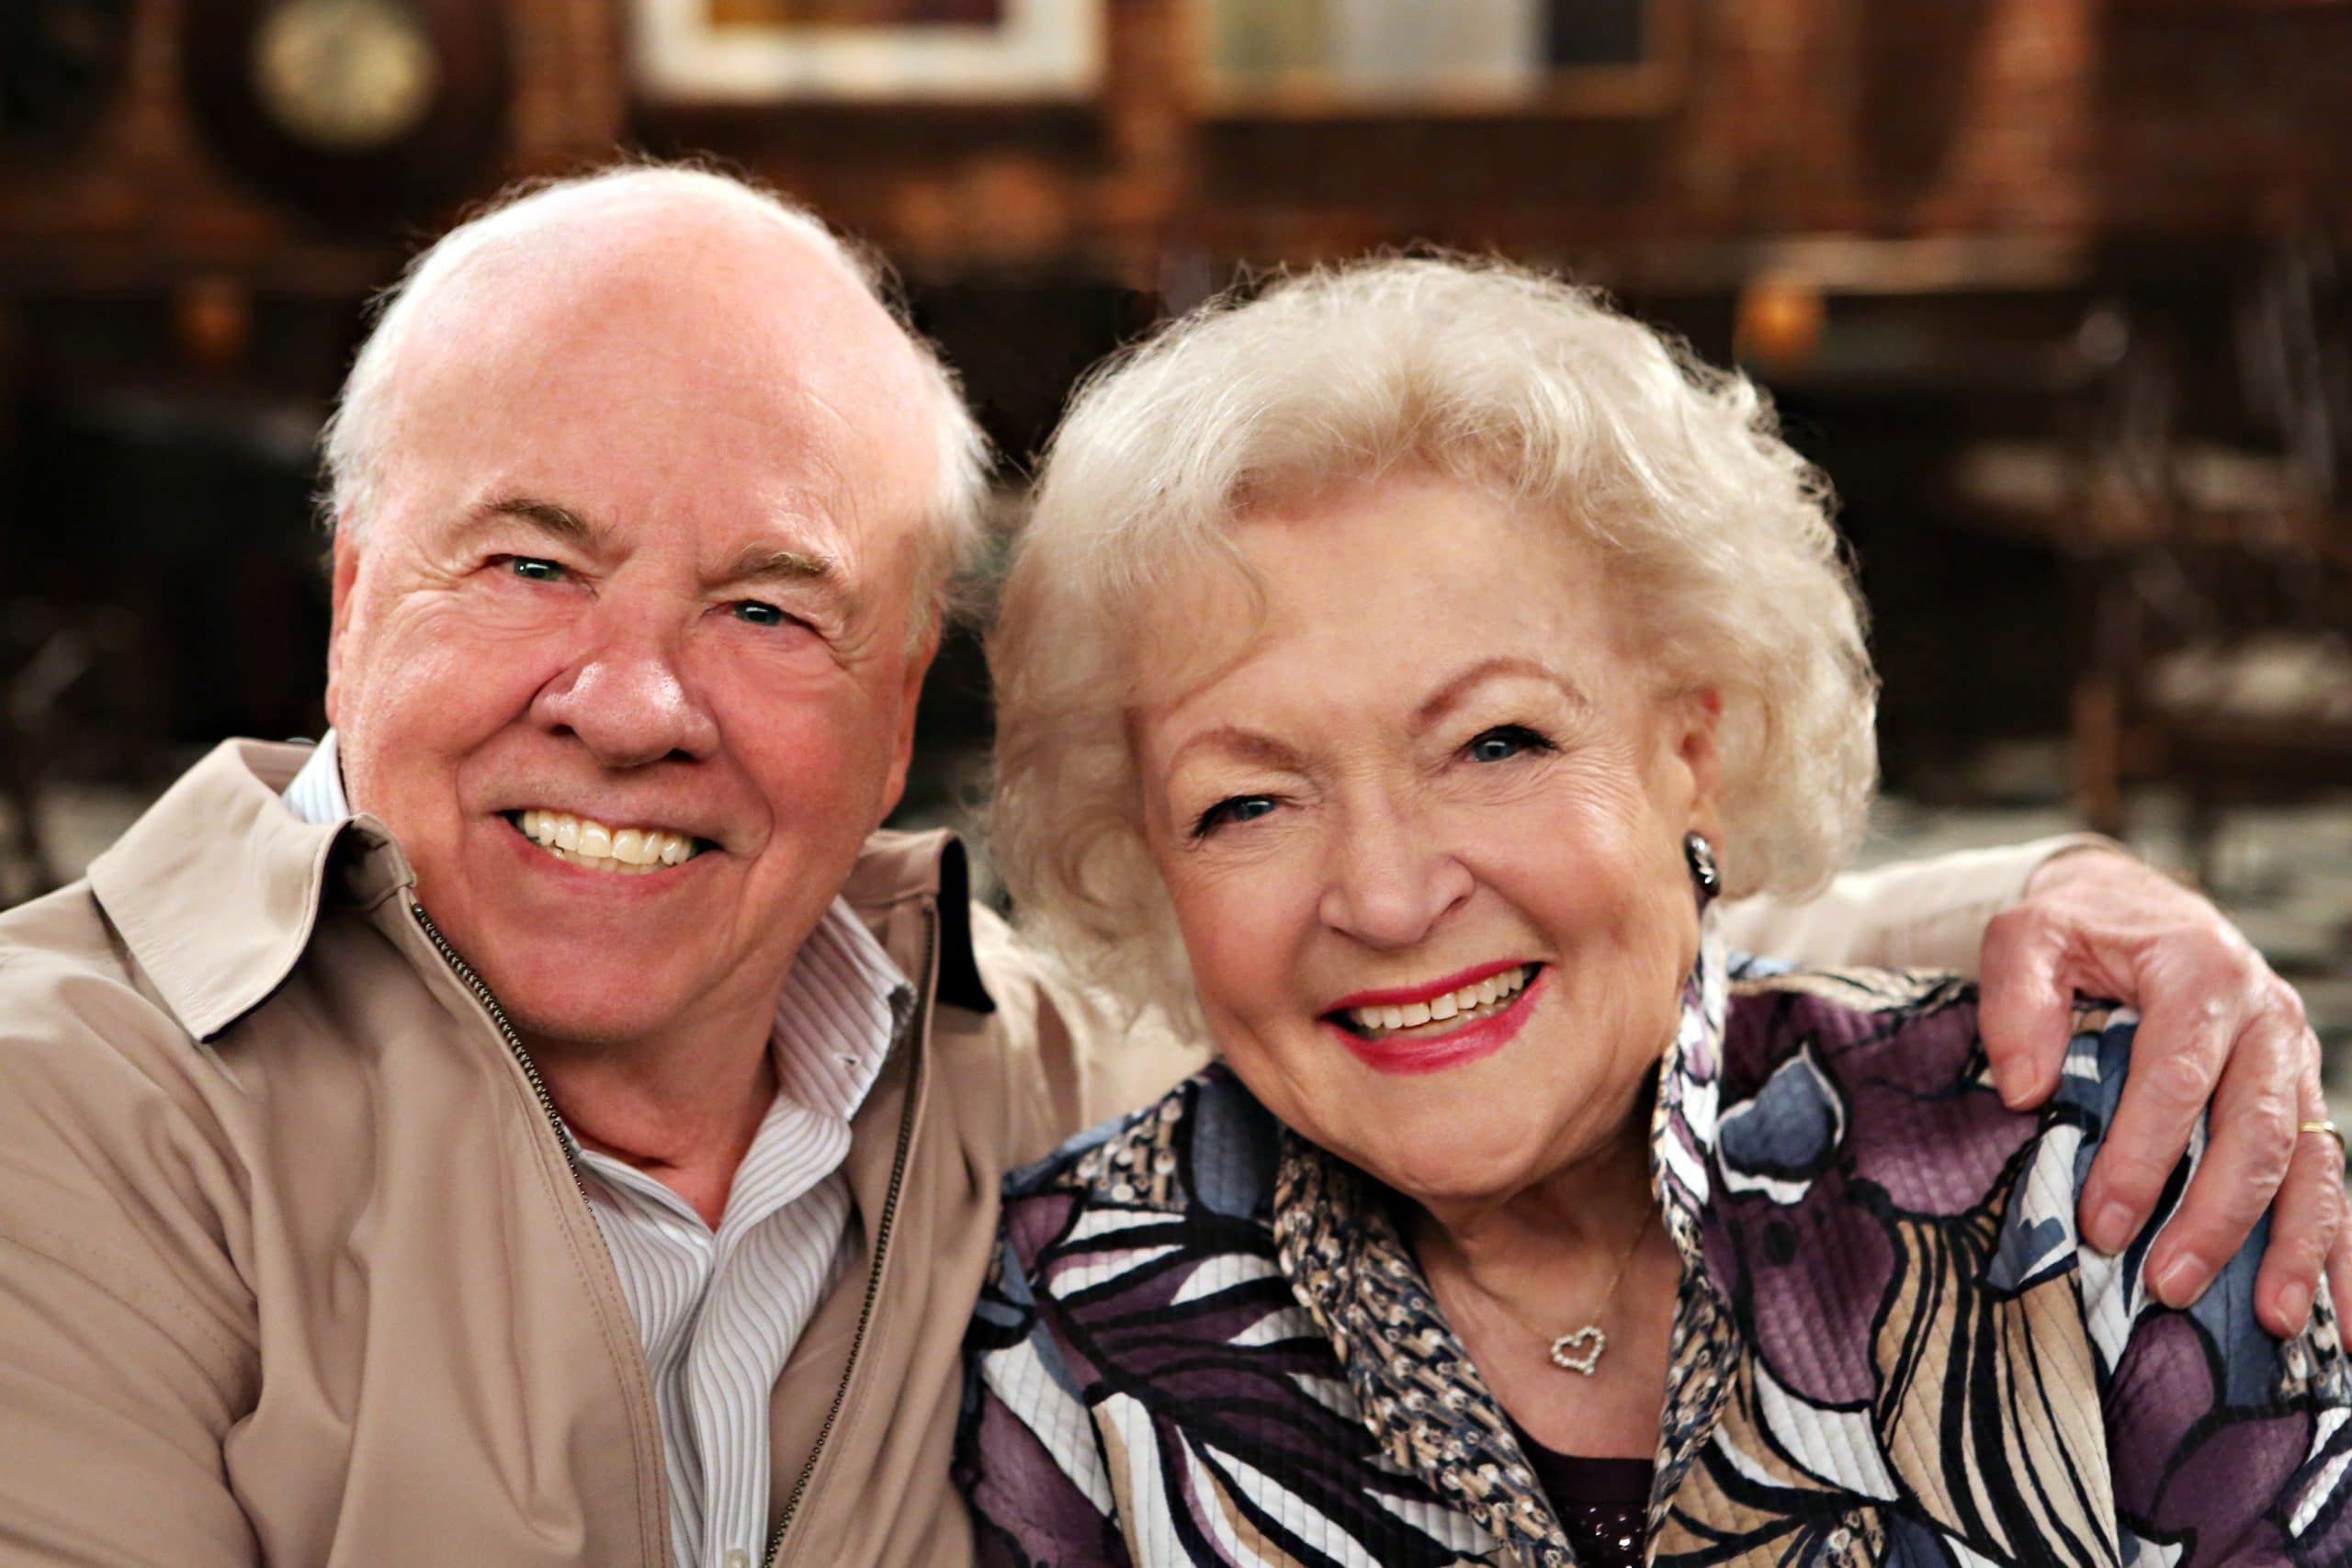 HOT IN CLEVELAND, l-r: Tim Conway, Betty White in 'Canoga Falls'